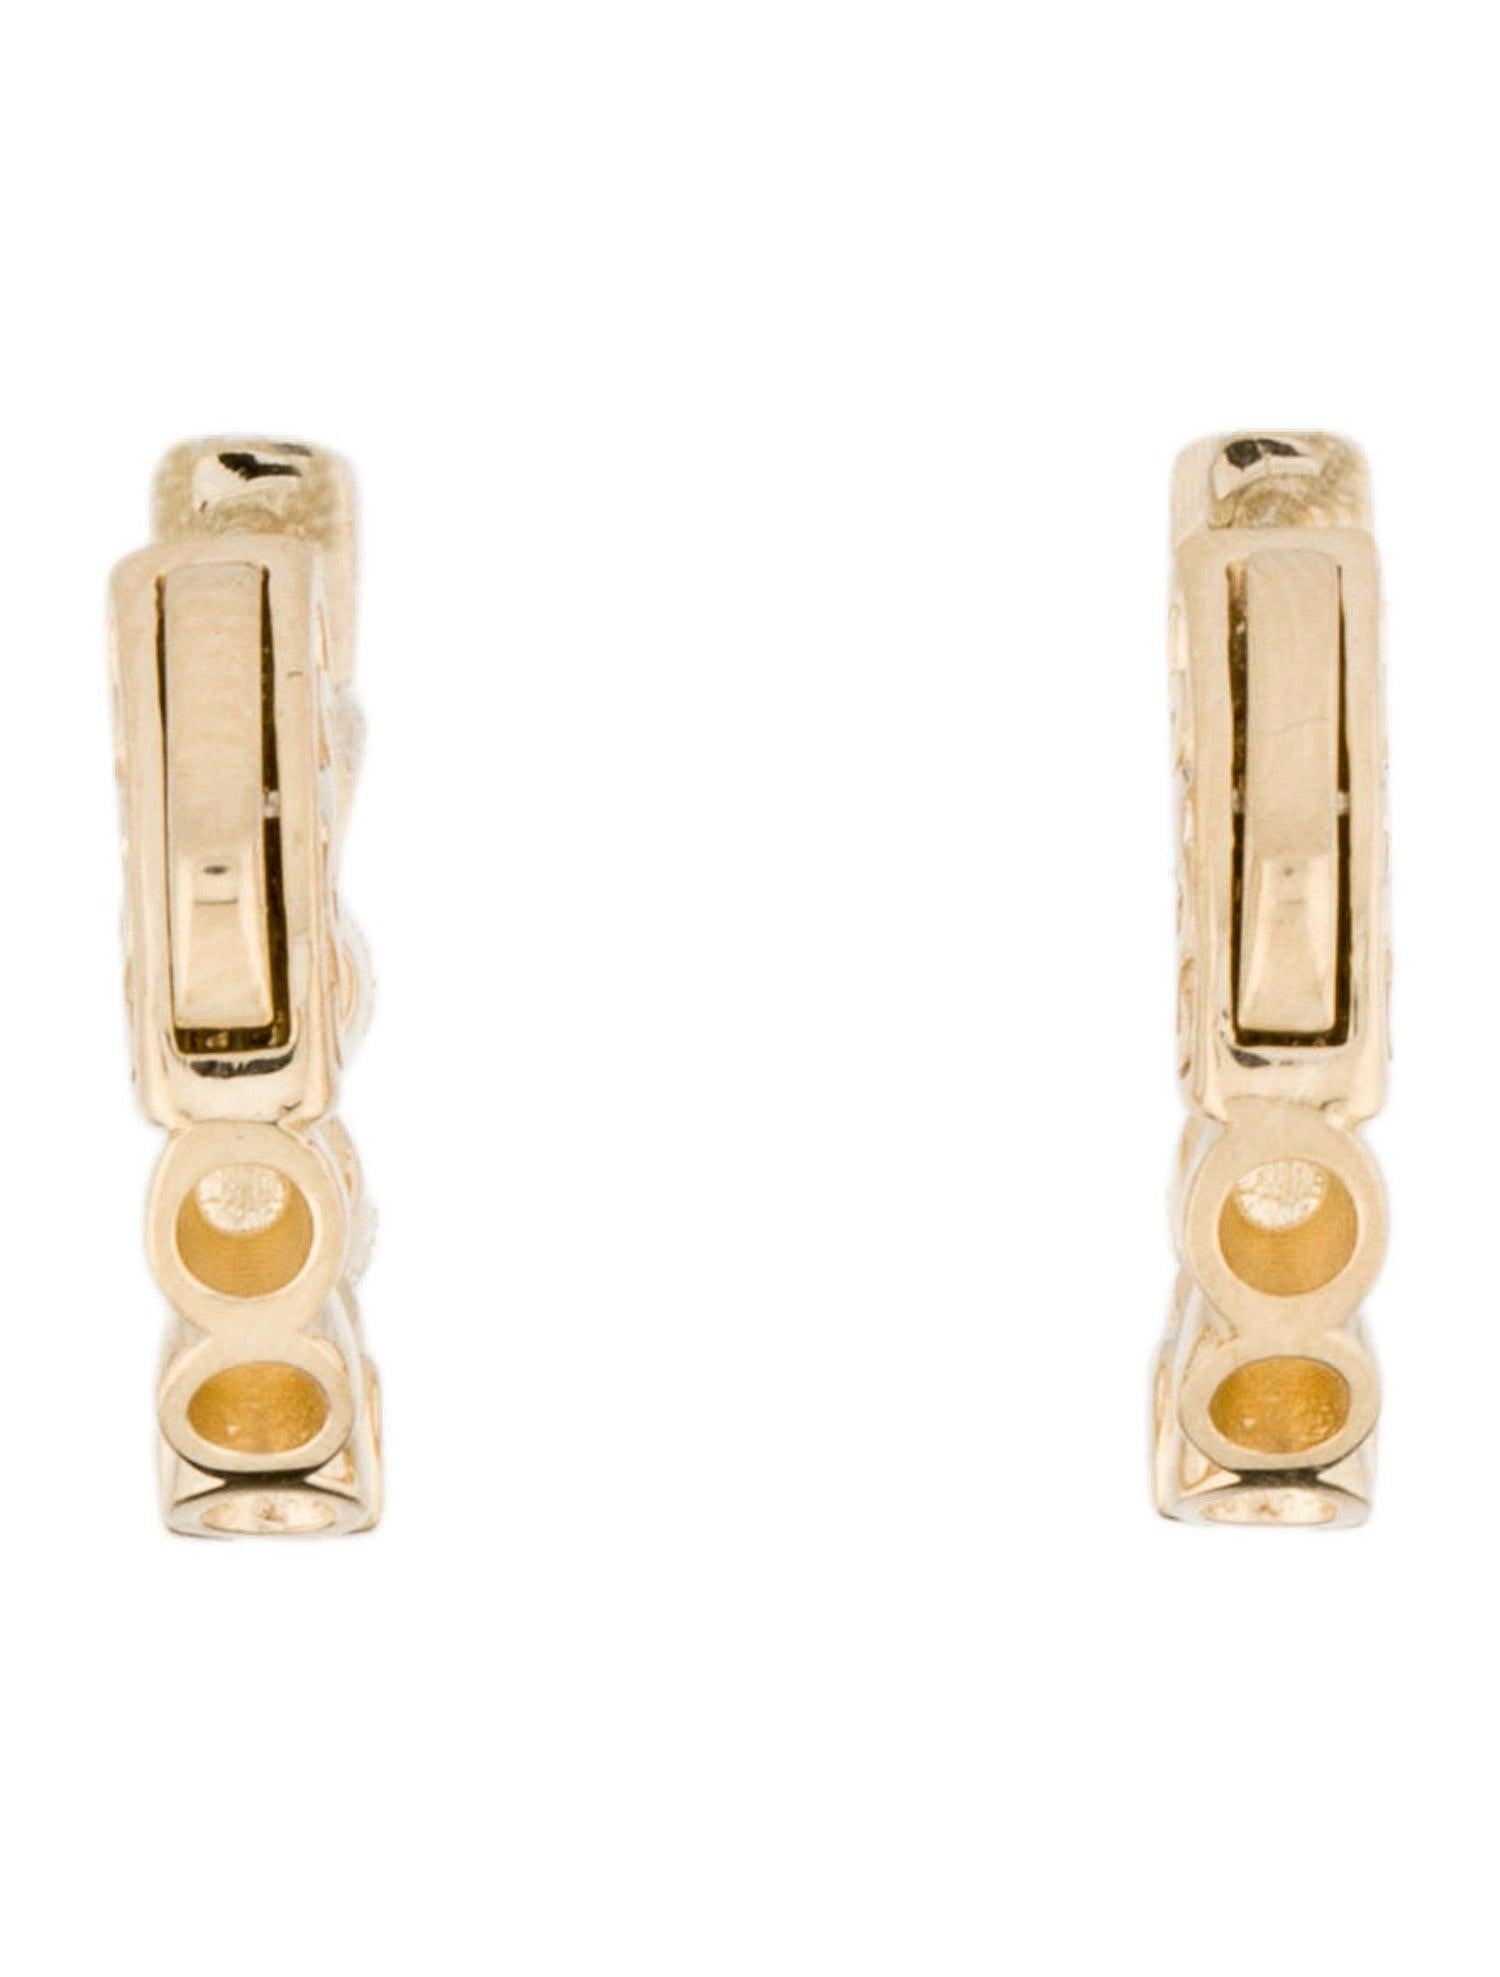 Quality Earrings Set: Made from real 14k gold and 28 glittering natural white approximately 0.50 ct. Certified diamonds, featuring a single line of prong set white diamonds 1/2